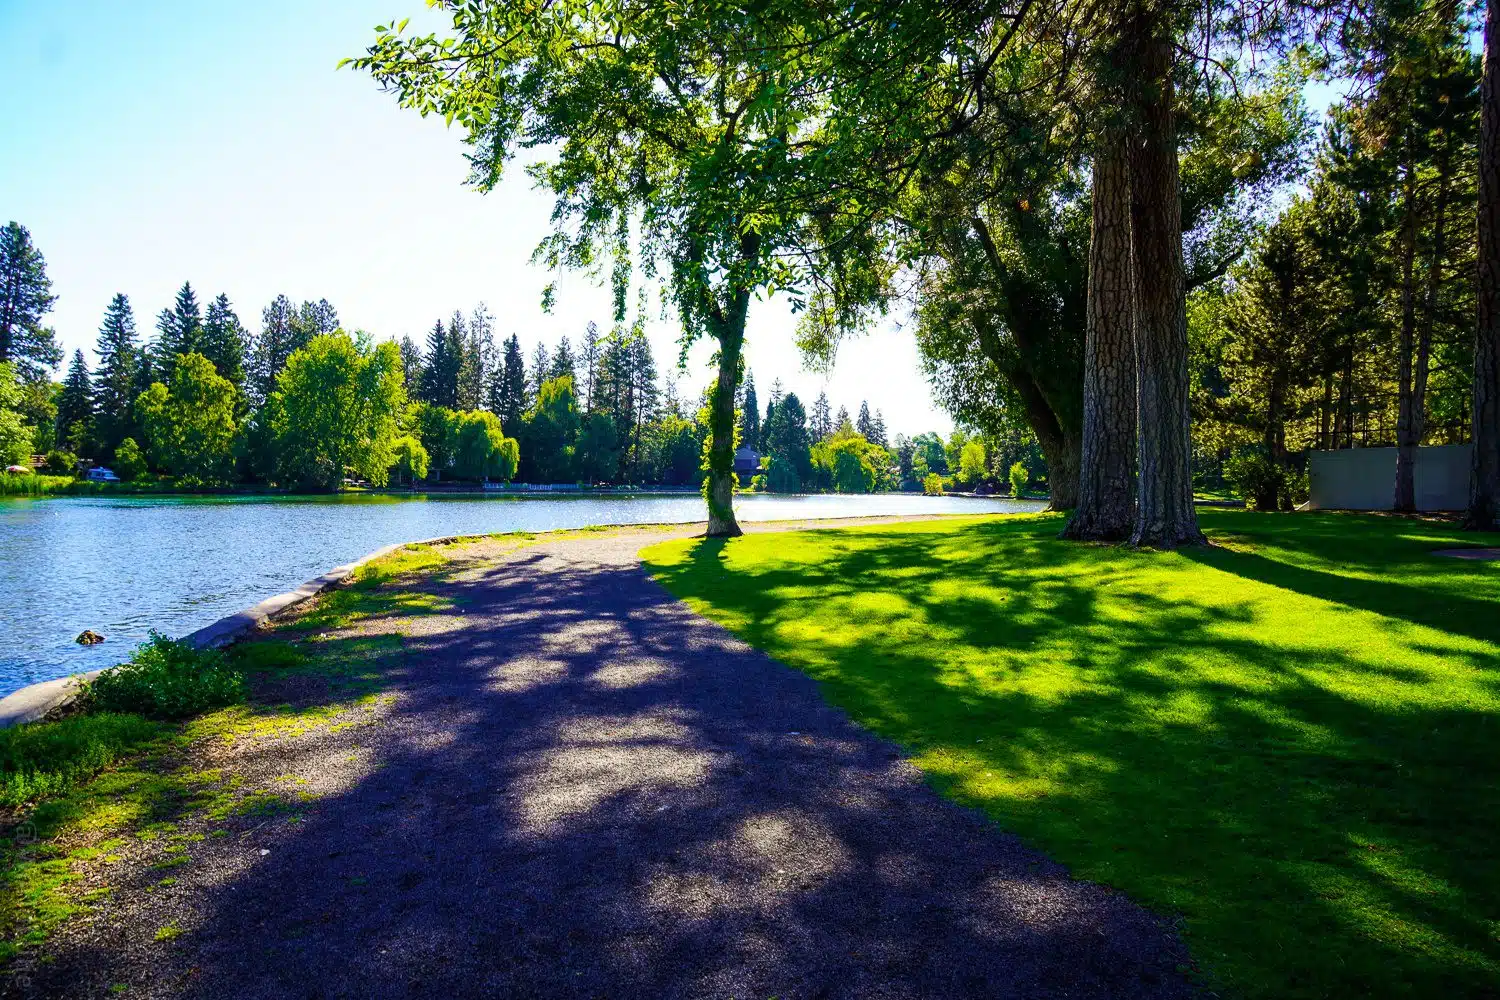 There's a gravel path by the Deschutes River.